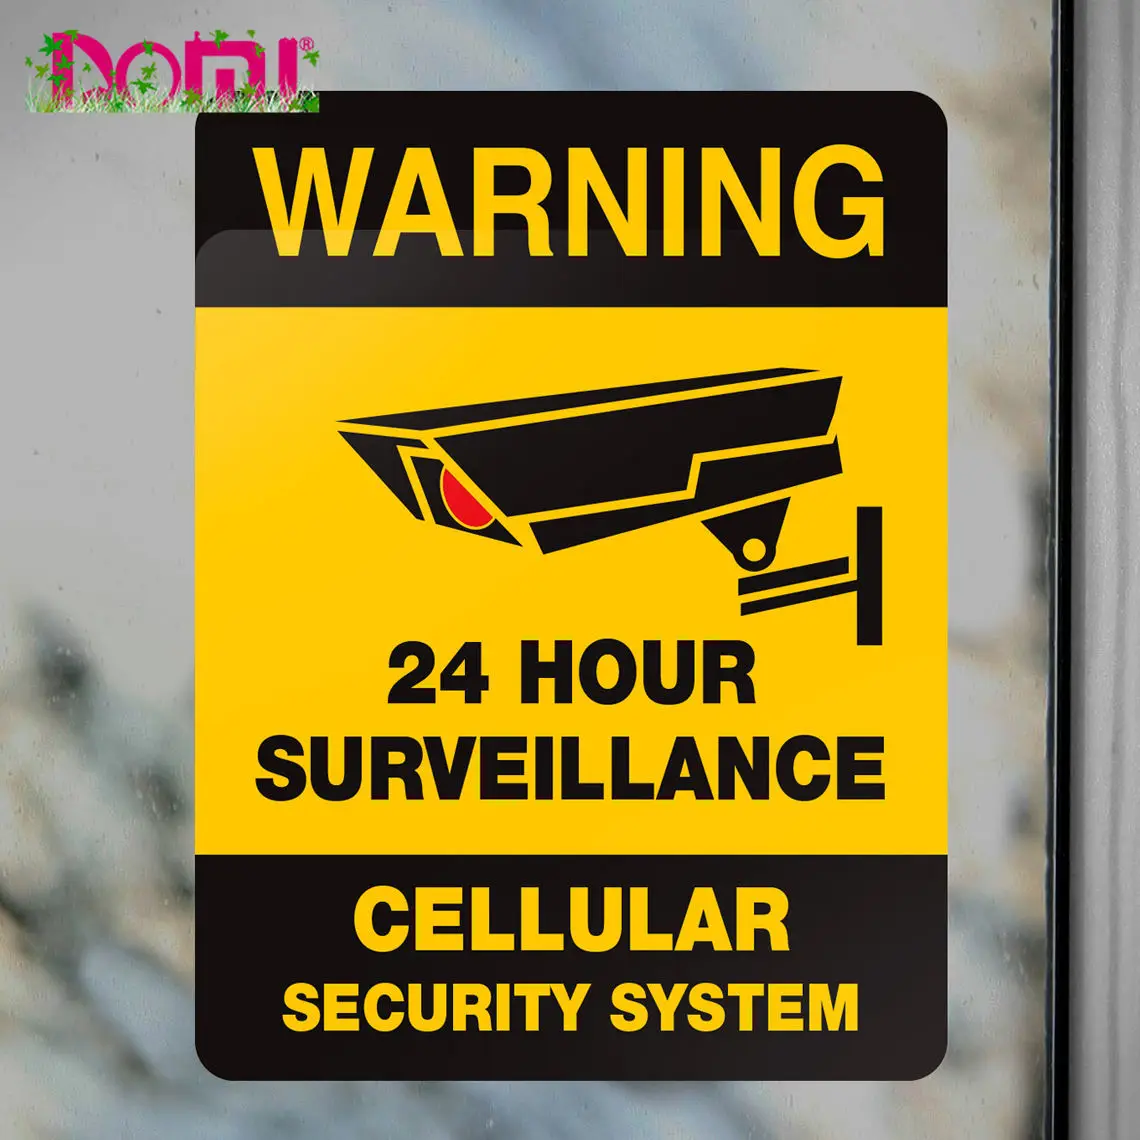 

SECURITY DECAL STICKER - 24 Hour VIDEO SURVEILLANCE System Property Warning Car Sticker Decal Windshield Vinyl Cover Scratches